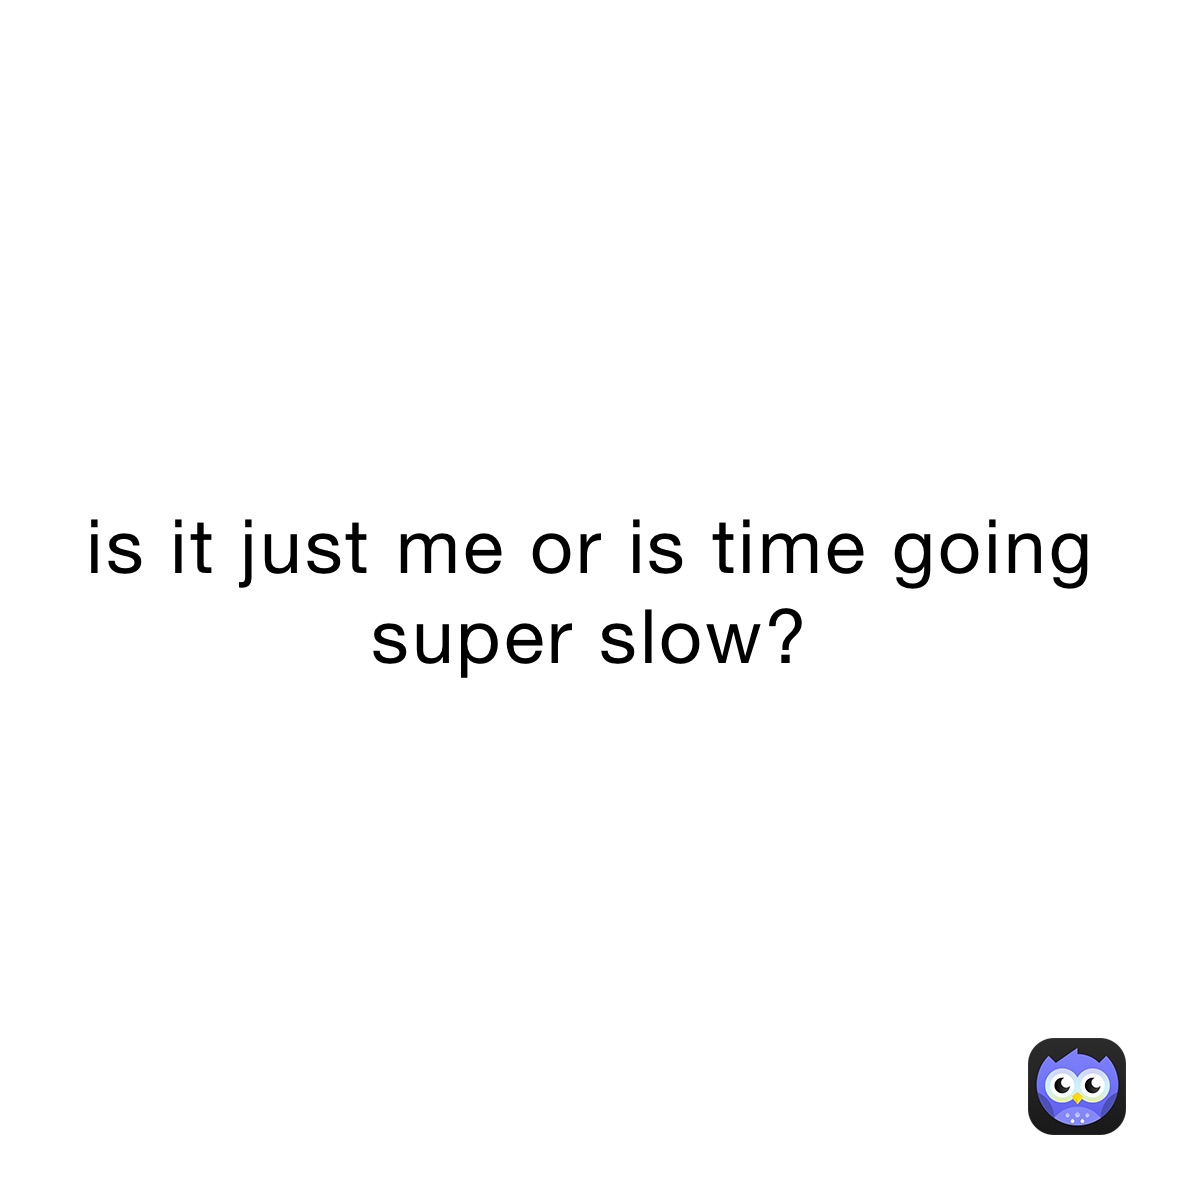 is it just me or is time going super slow?